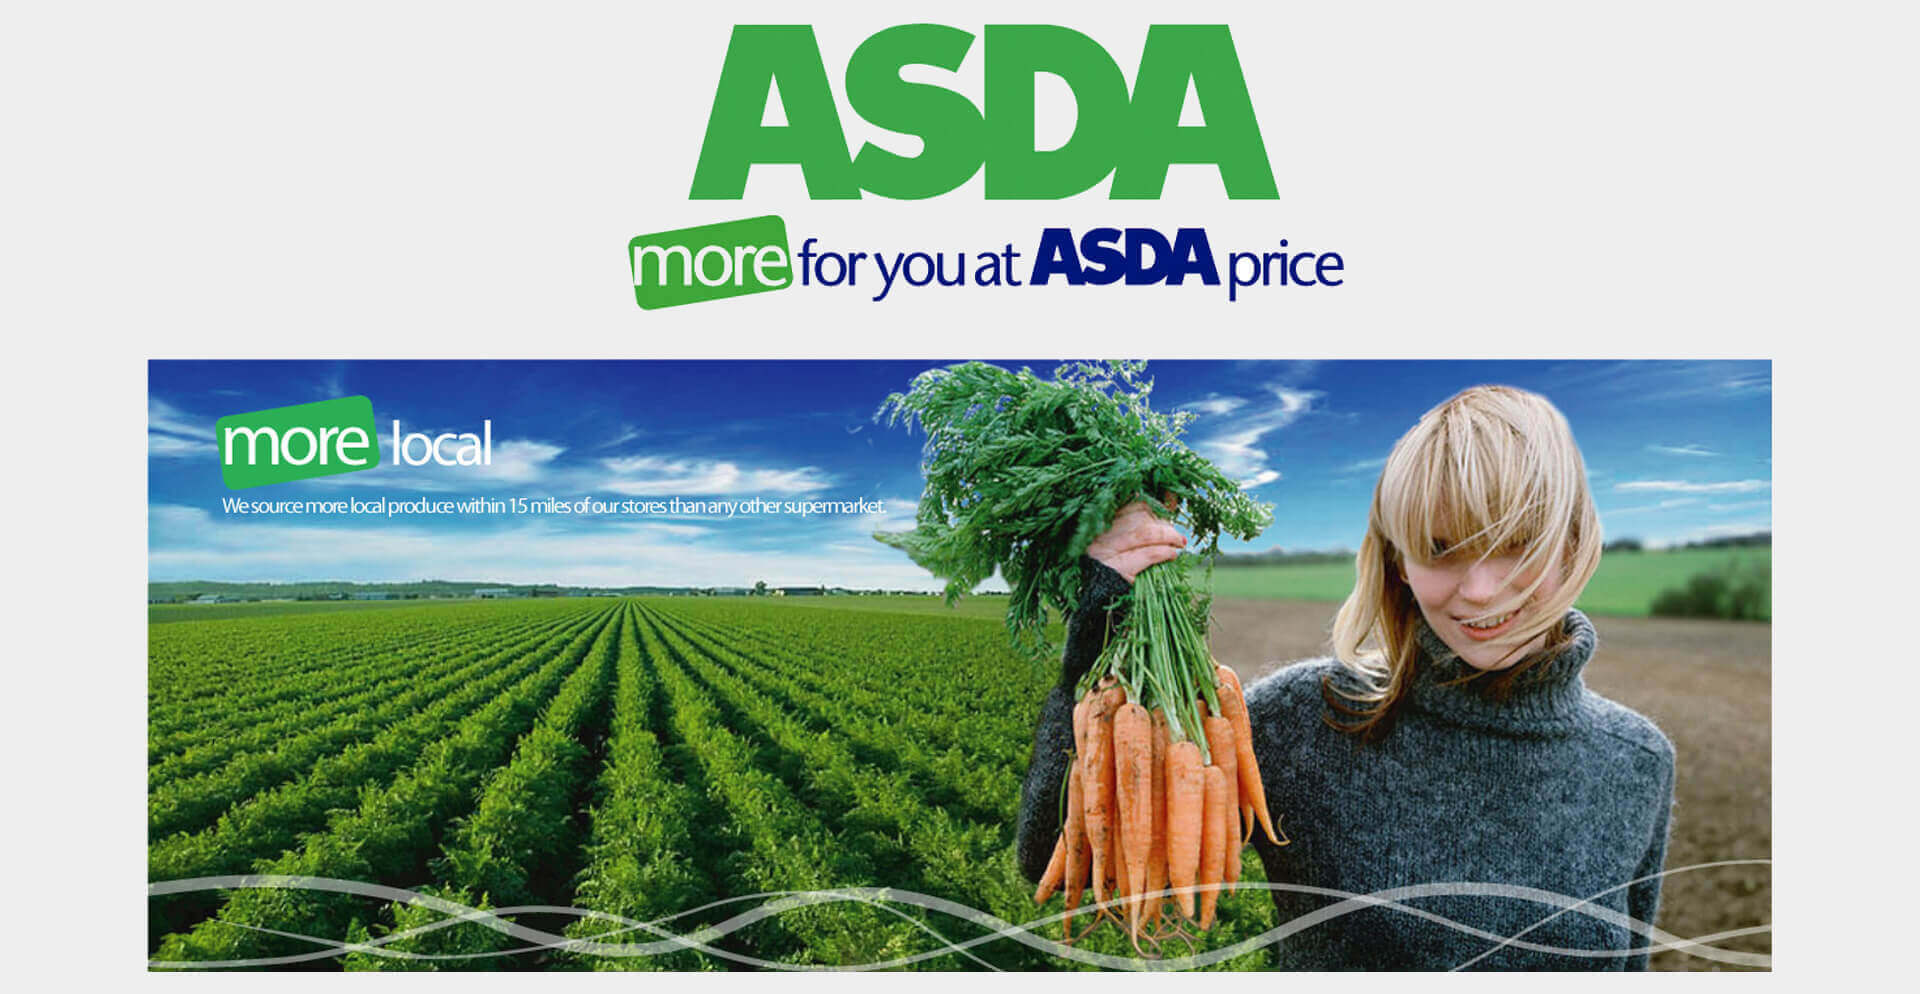 Asda more for you at Asda price promotion and branding